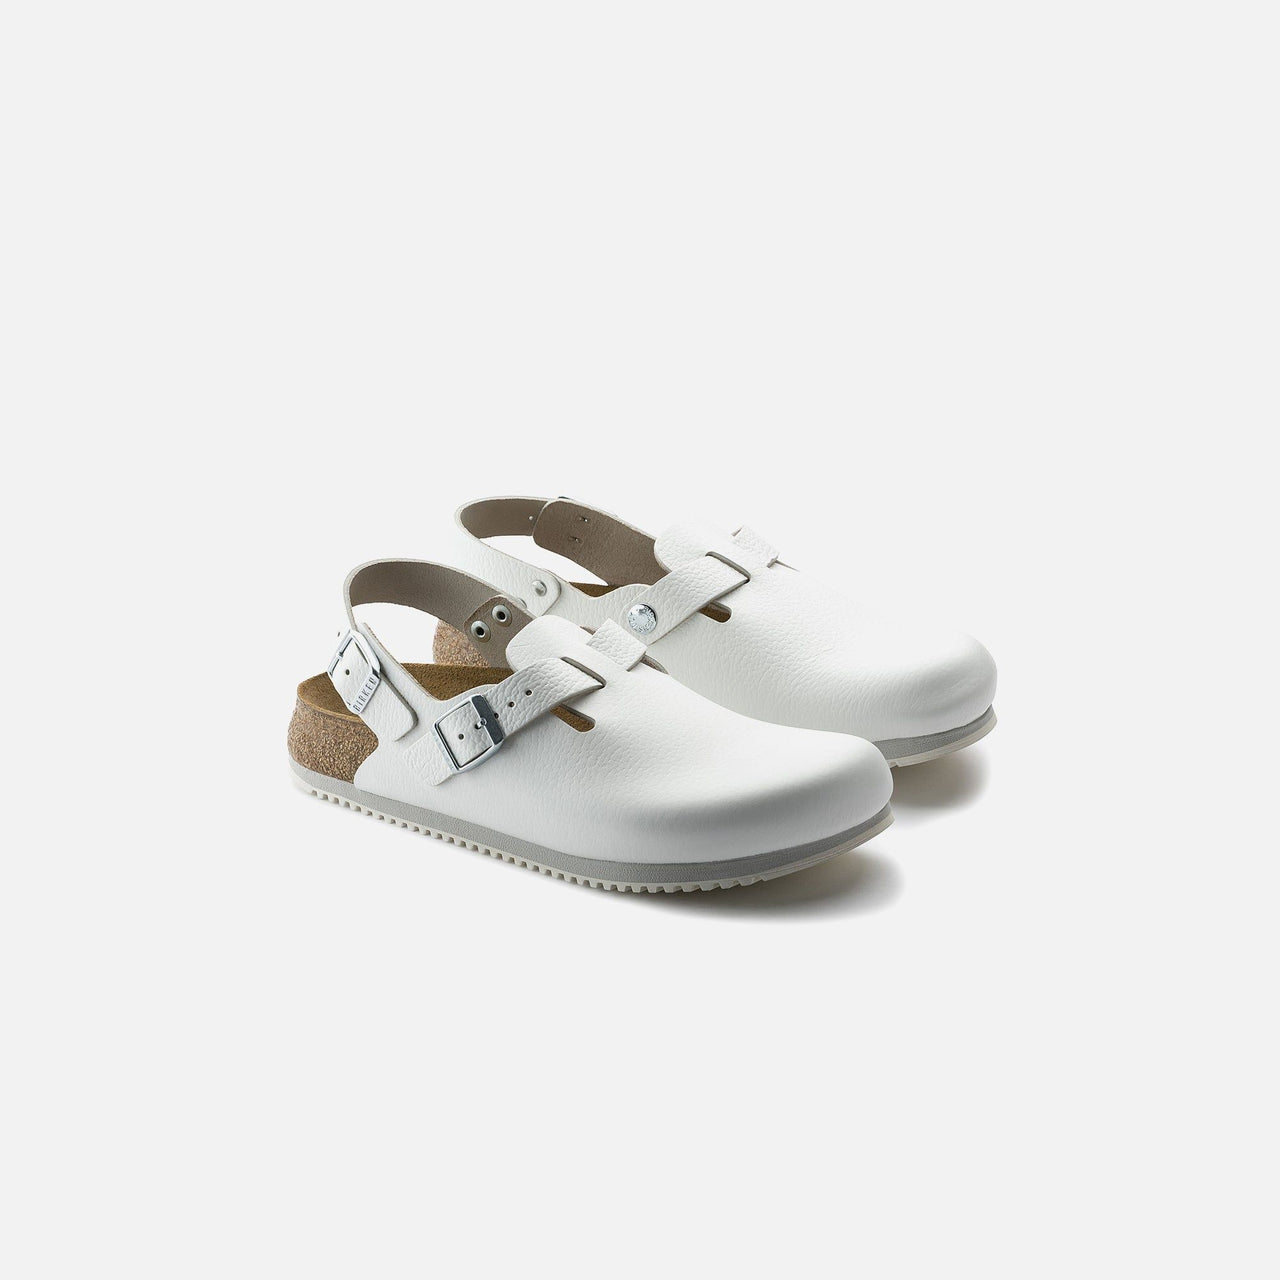 Professional white leather clogs with adjustable strap and supportive footbed